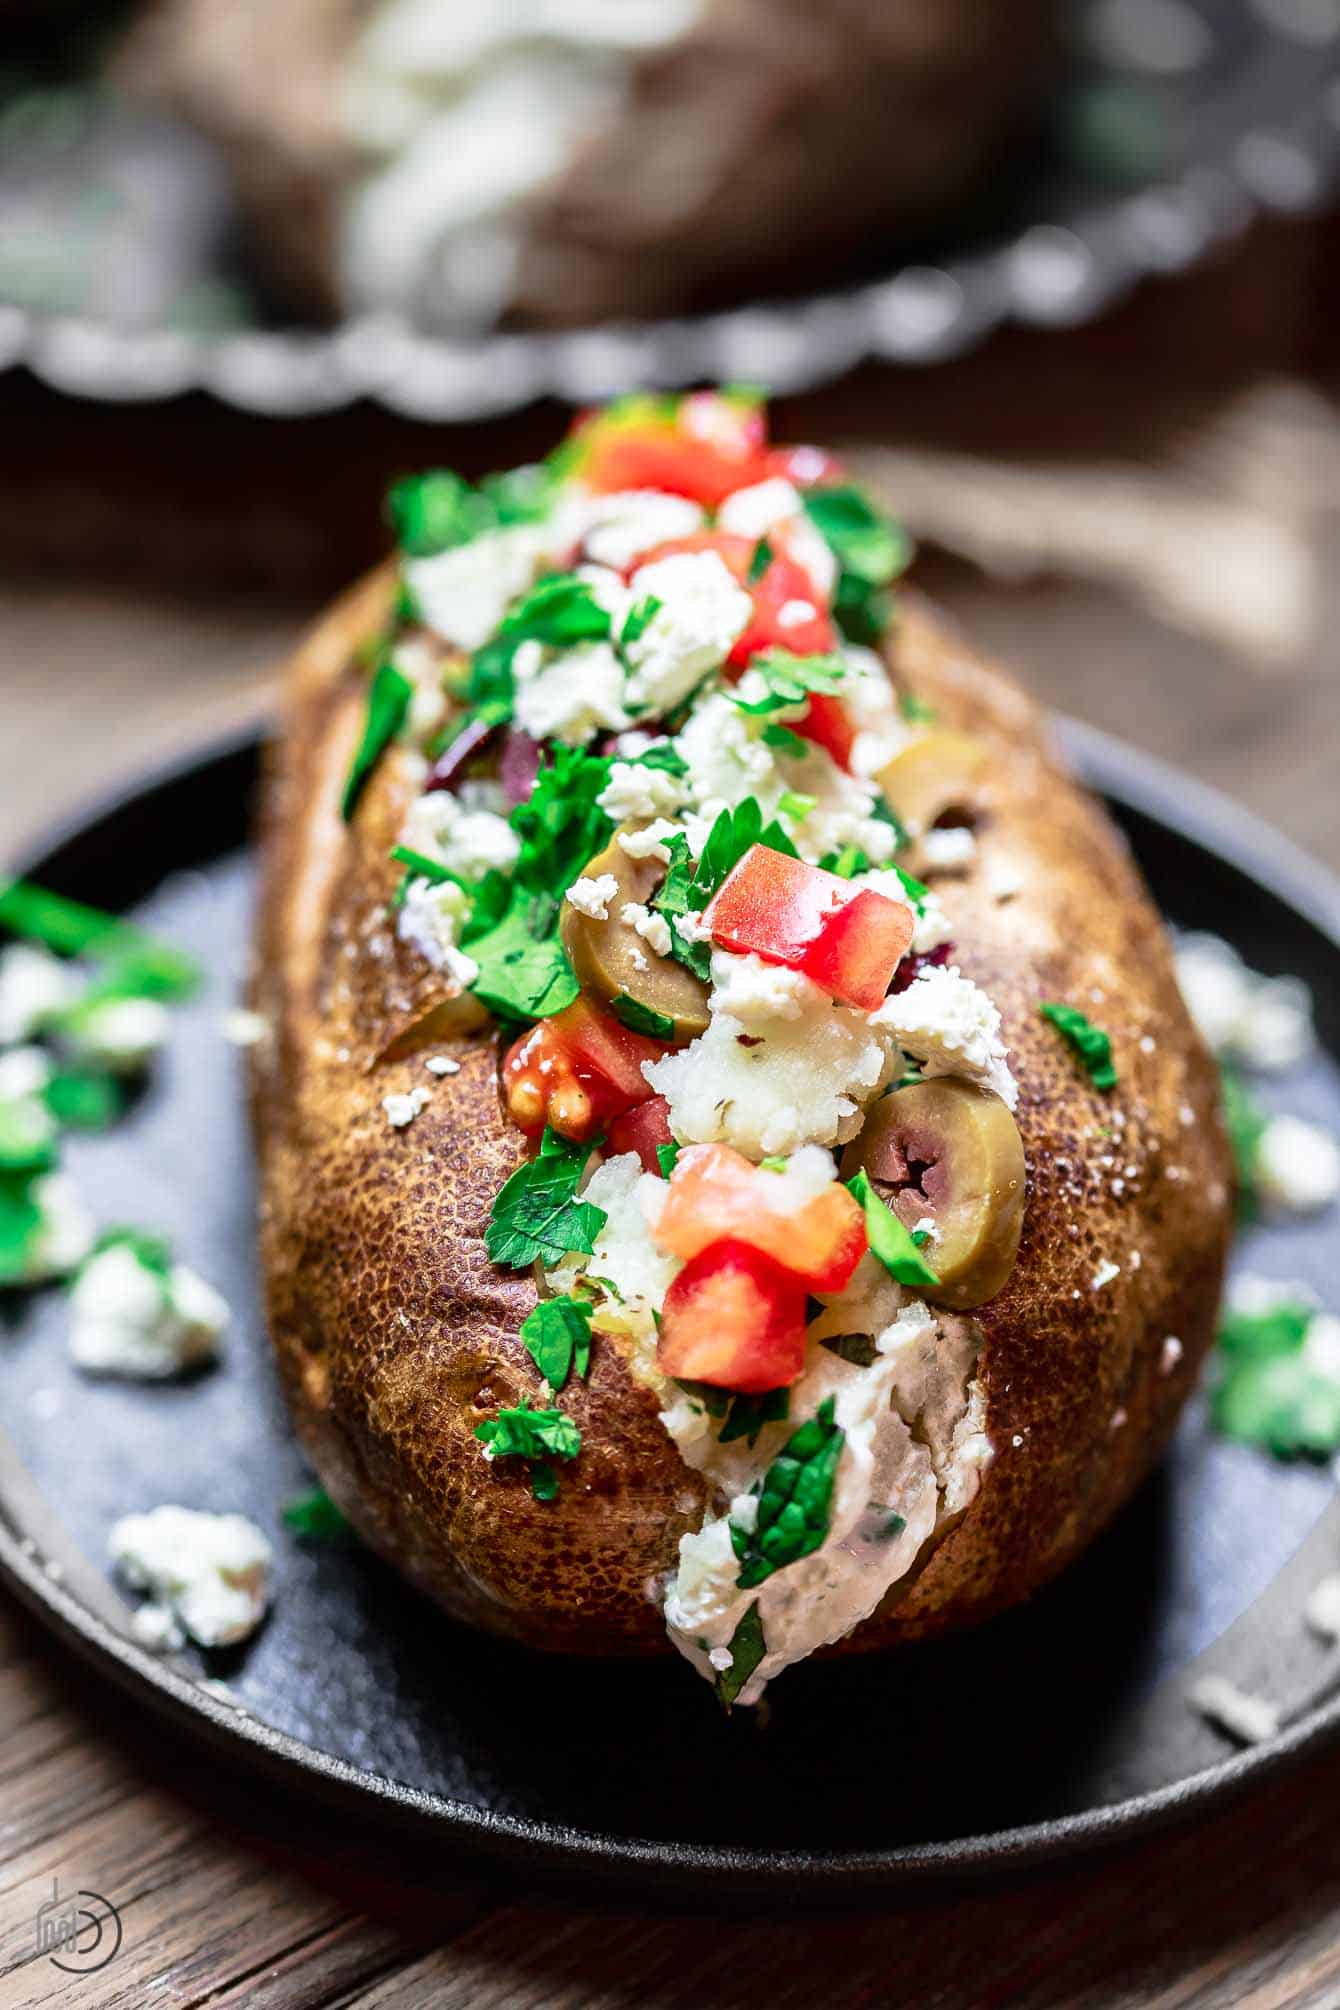 Master The Art Of Baking The Perfect Potato: A Step-by-Step Guide